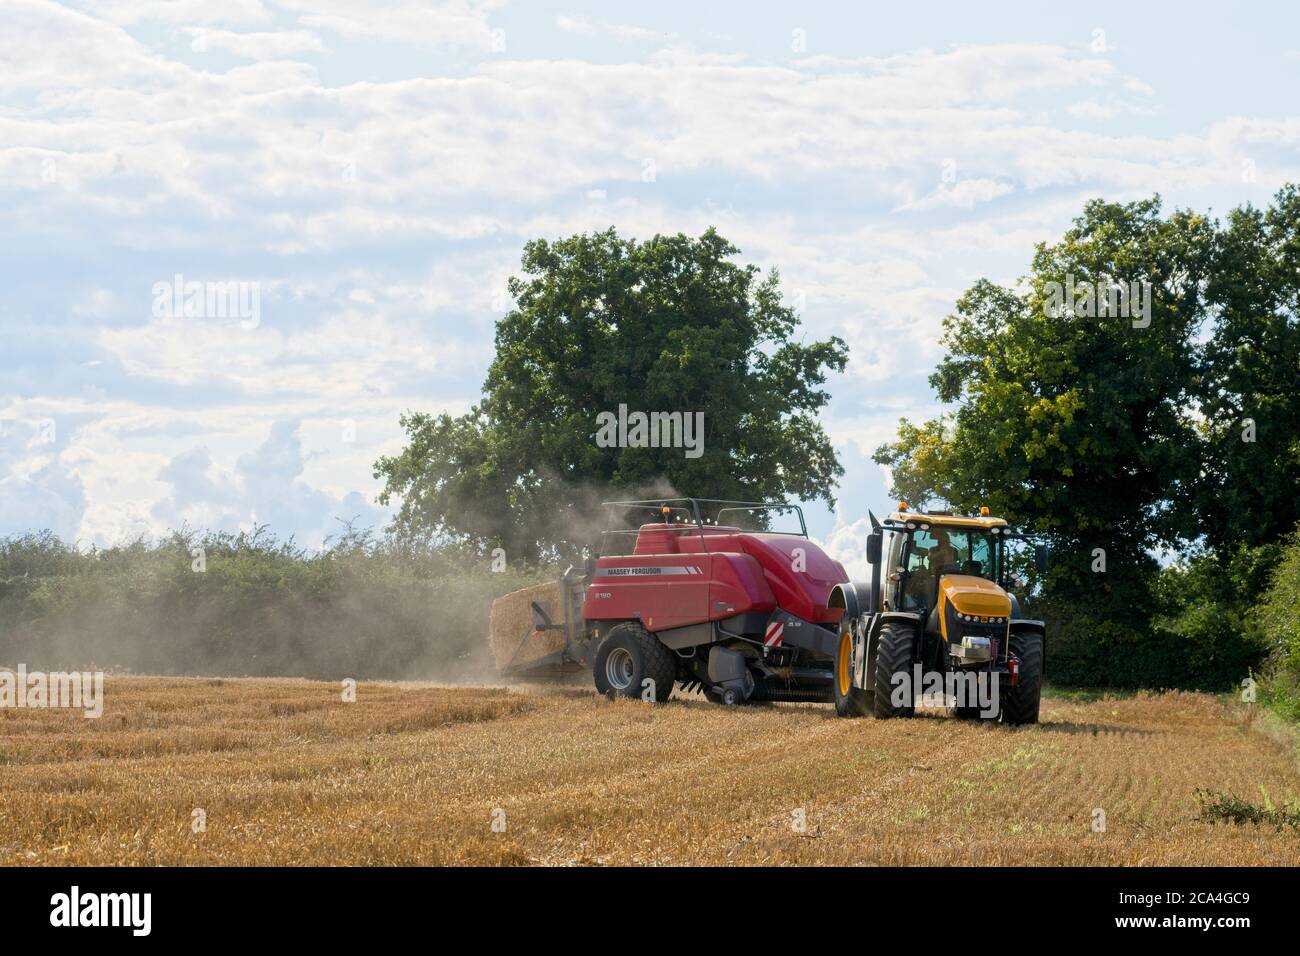 Baling after the harvest Close up view of bailer ejecting bale onto the ground Moving left to right Dust in the air Cloudy Trees Landscape format Stock Photo